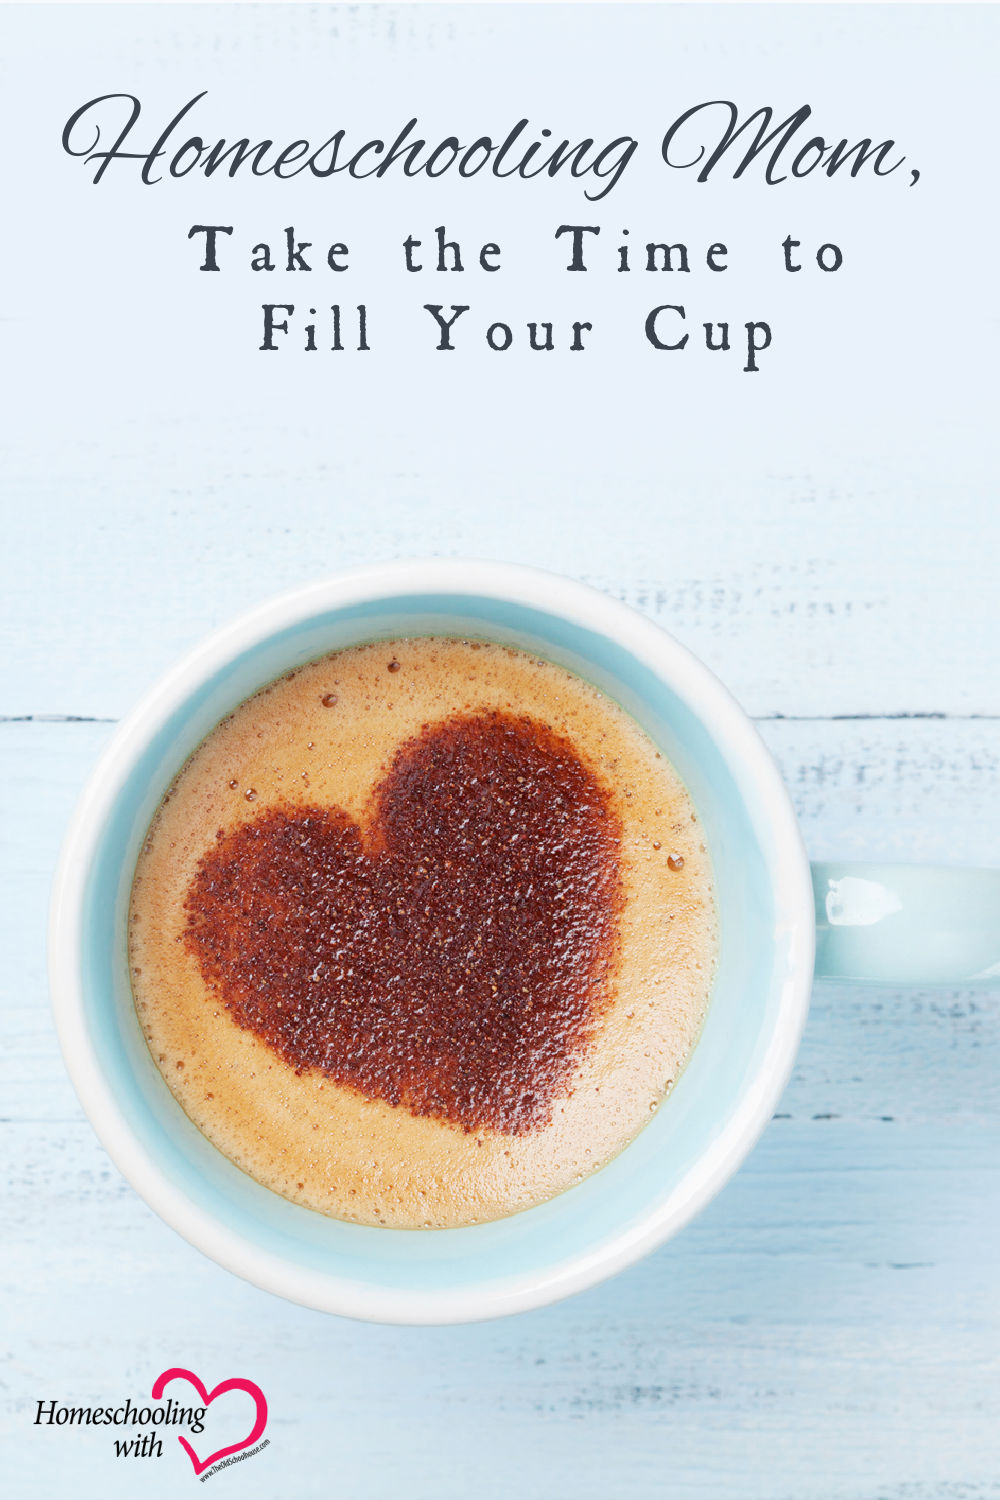 Homeschooling Mom, Take the Time to Fill Your Cup